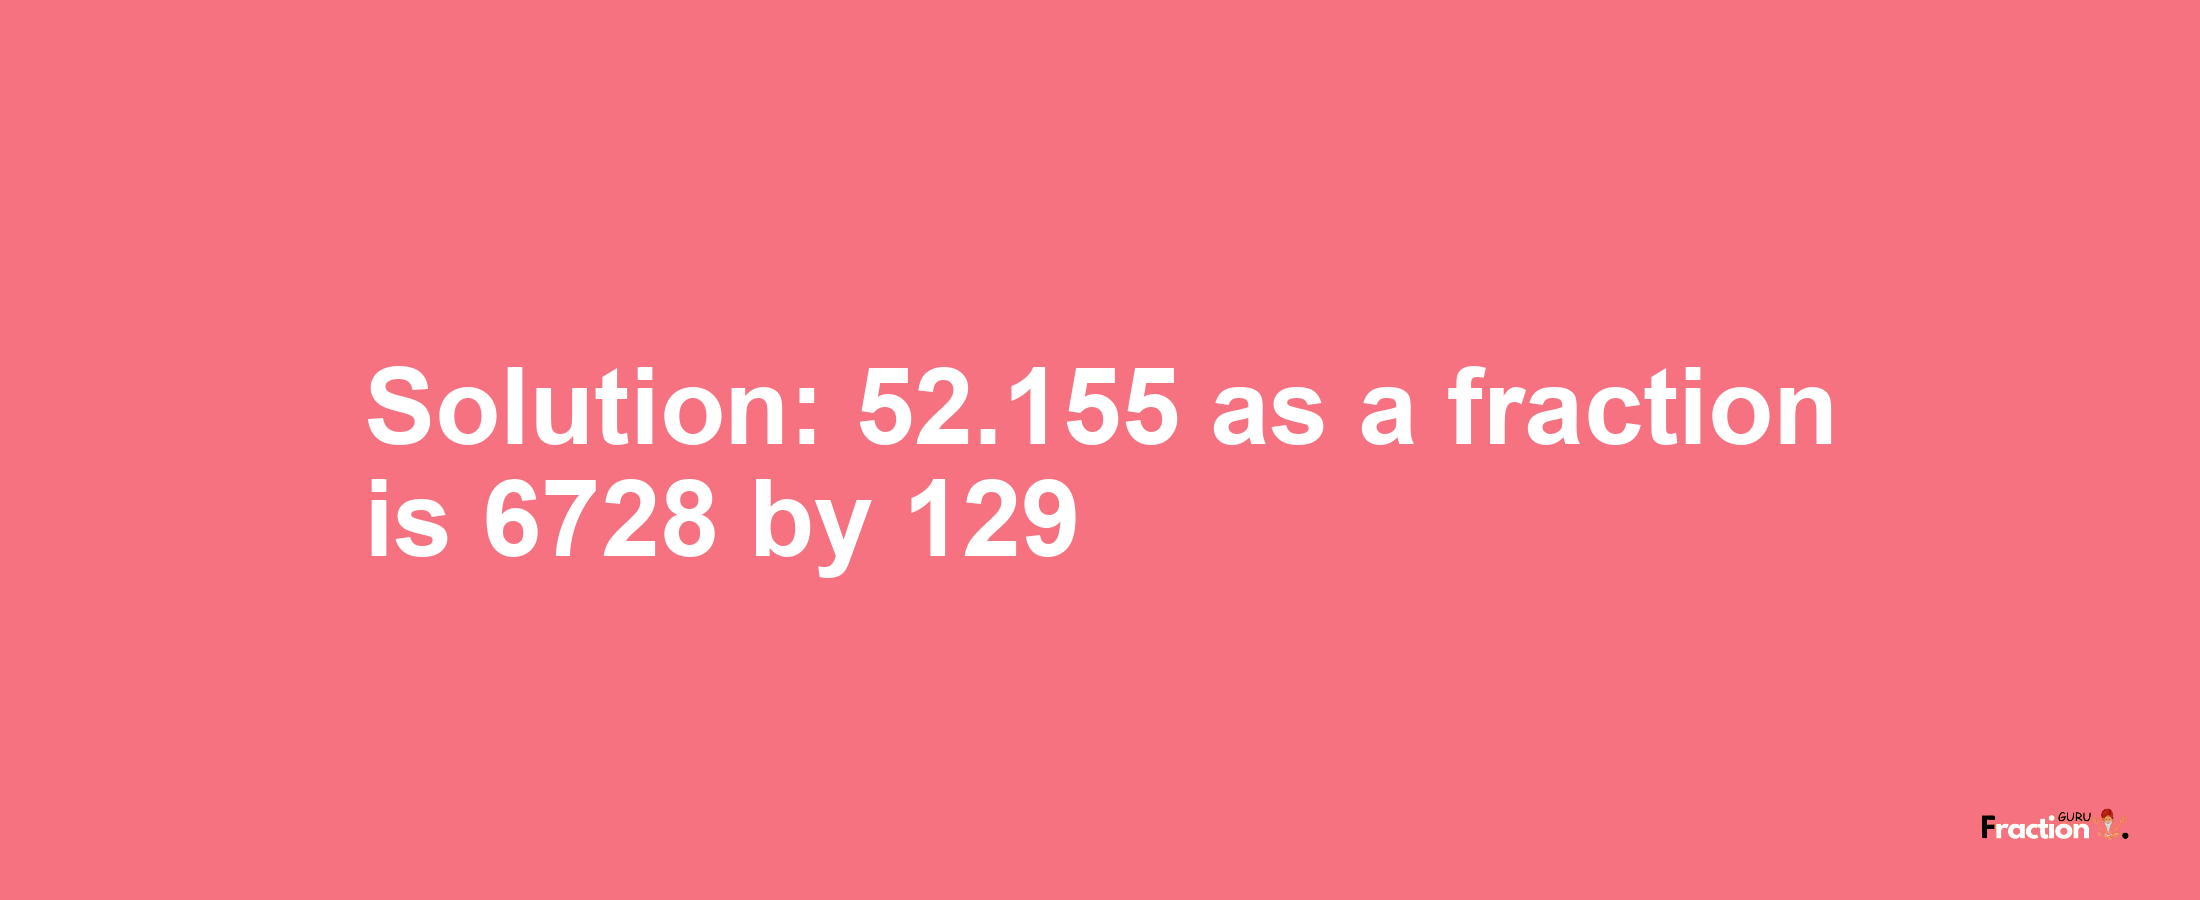 Solution:52.155 as a fraction is 6728/129